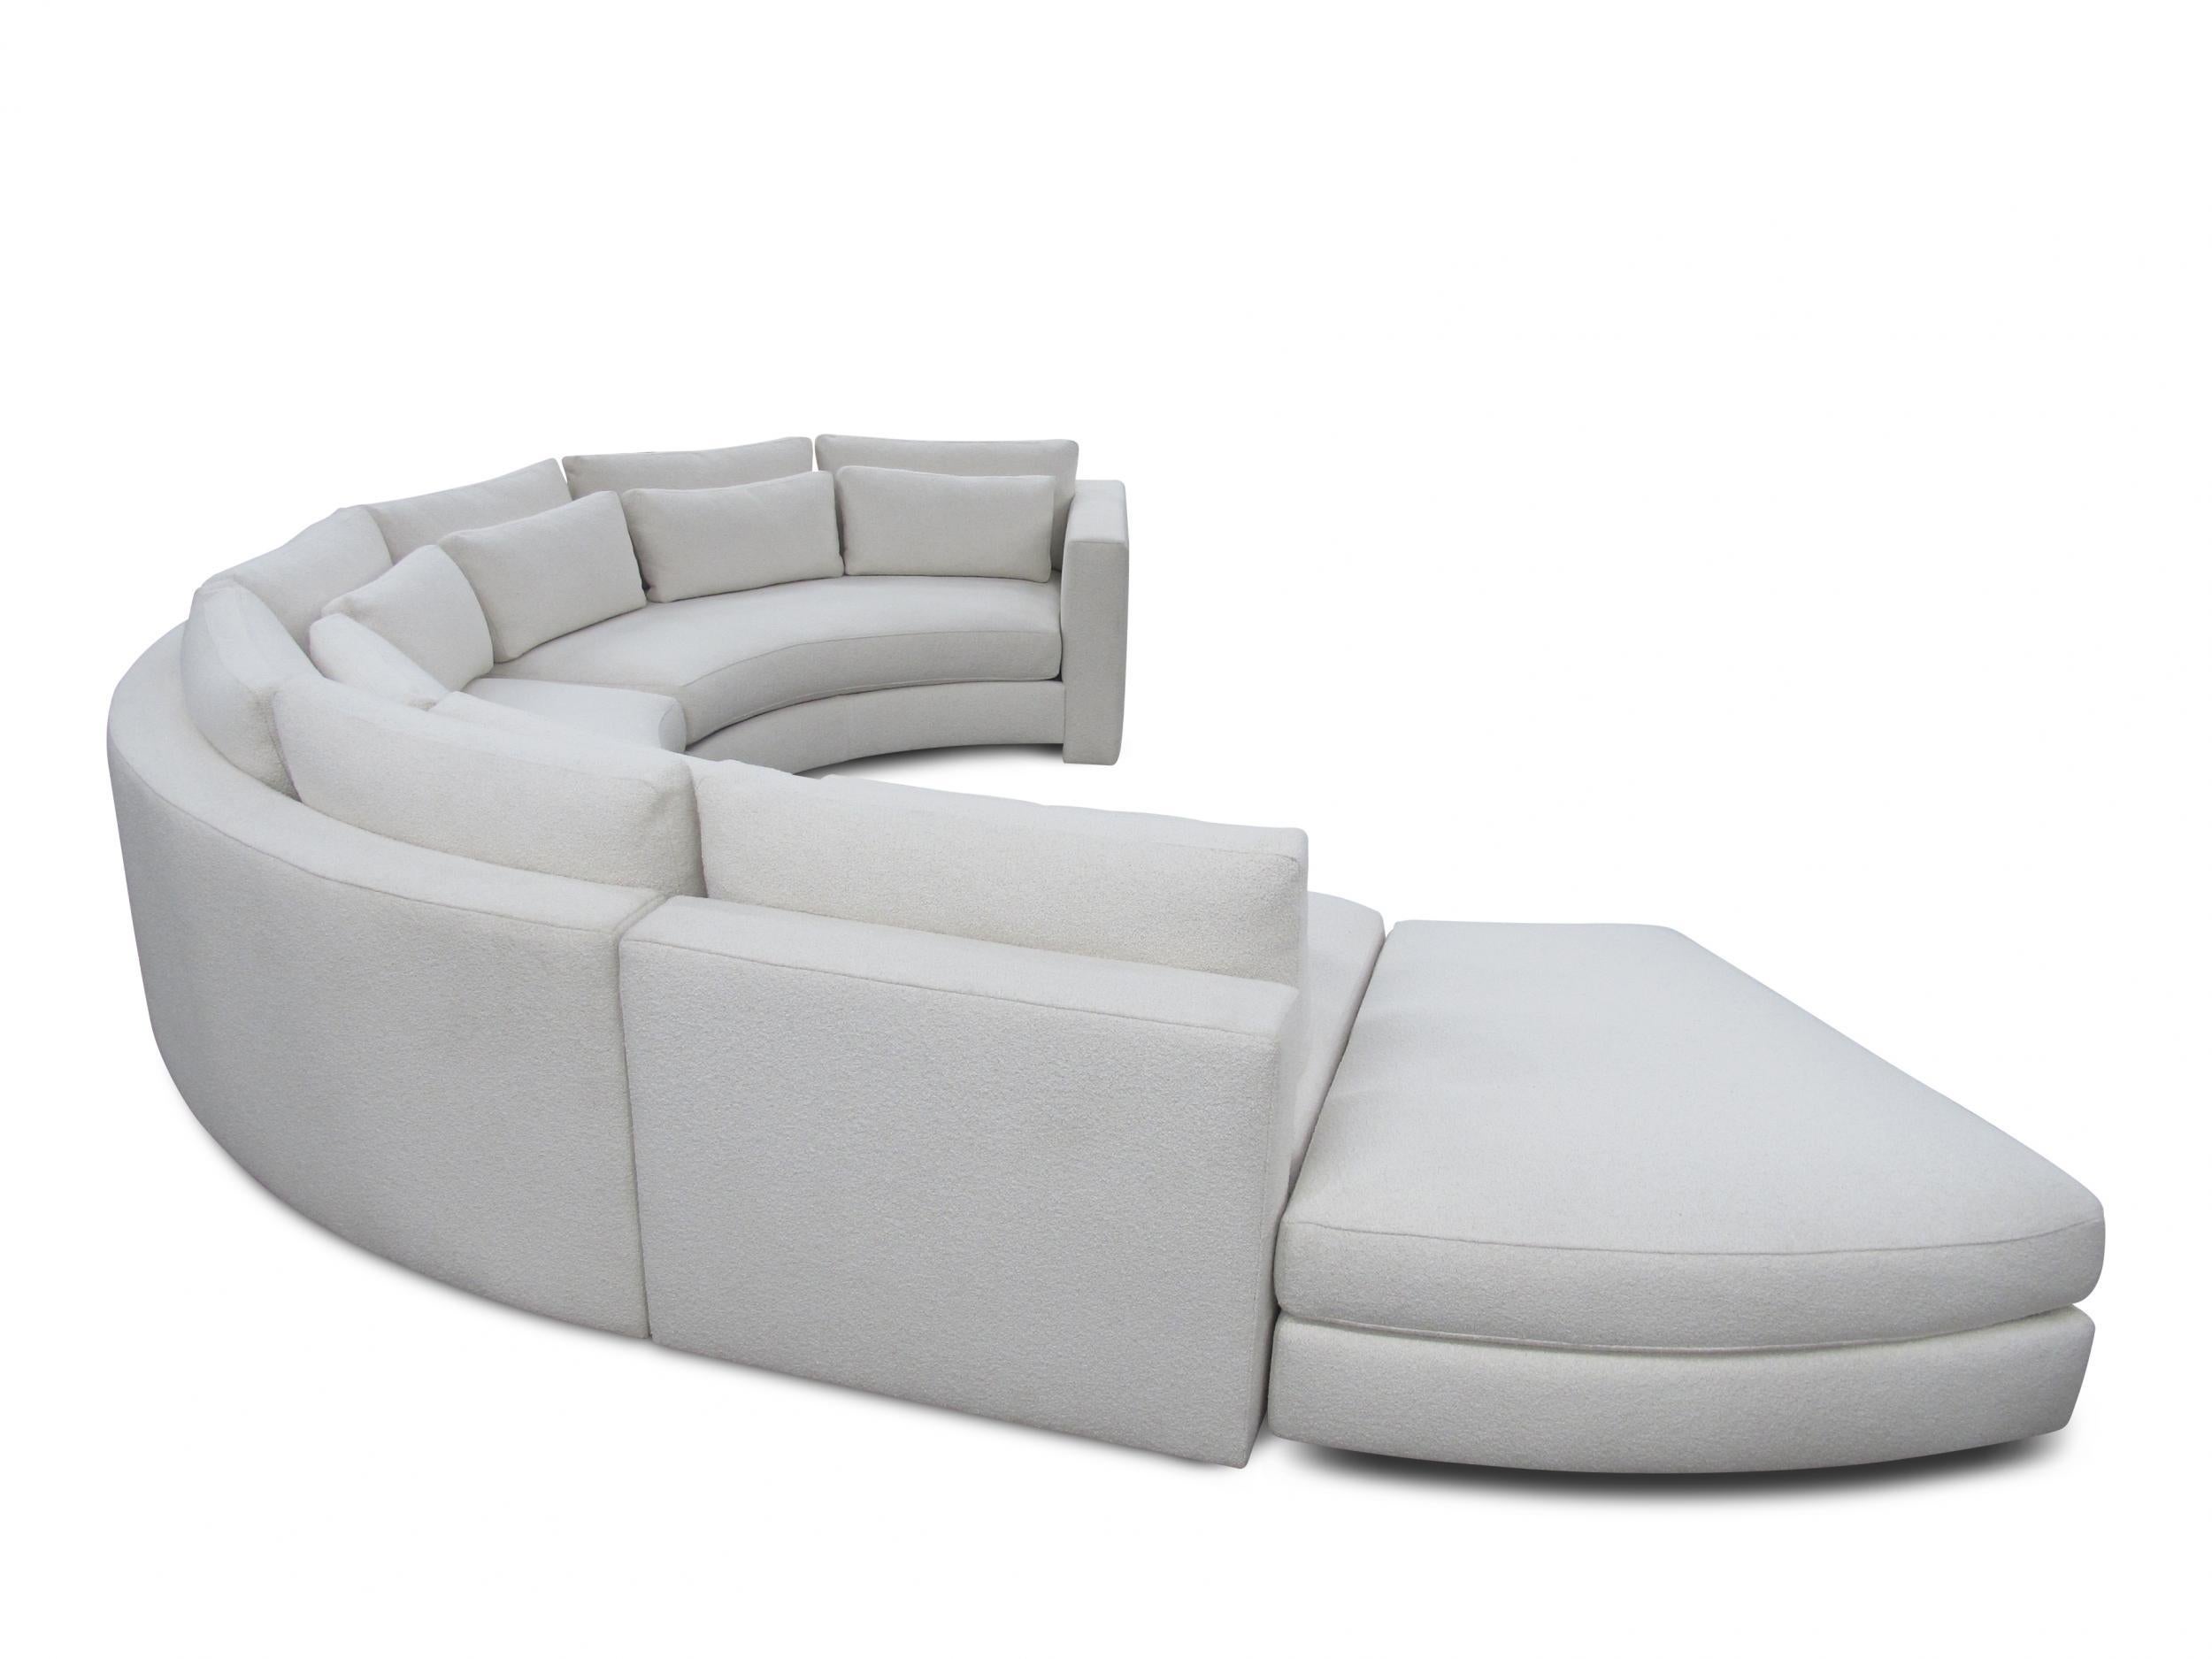 American Thayer Coggin Round Sectional Sofa in off White